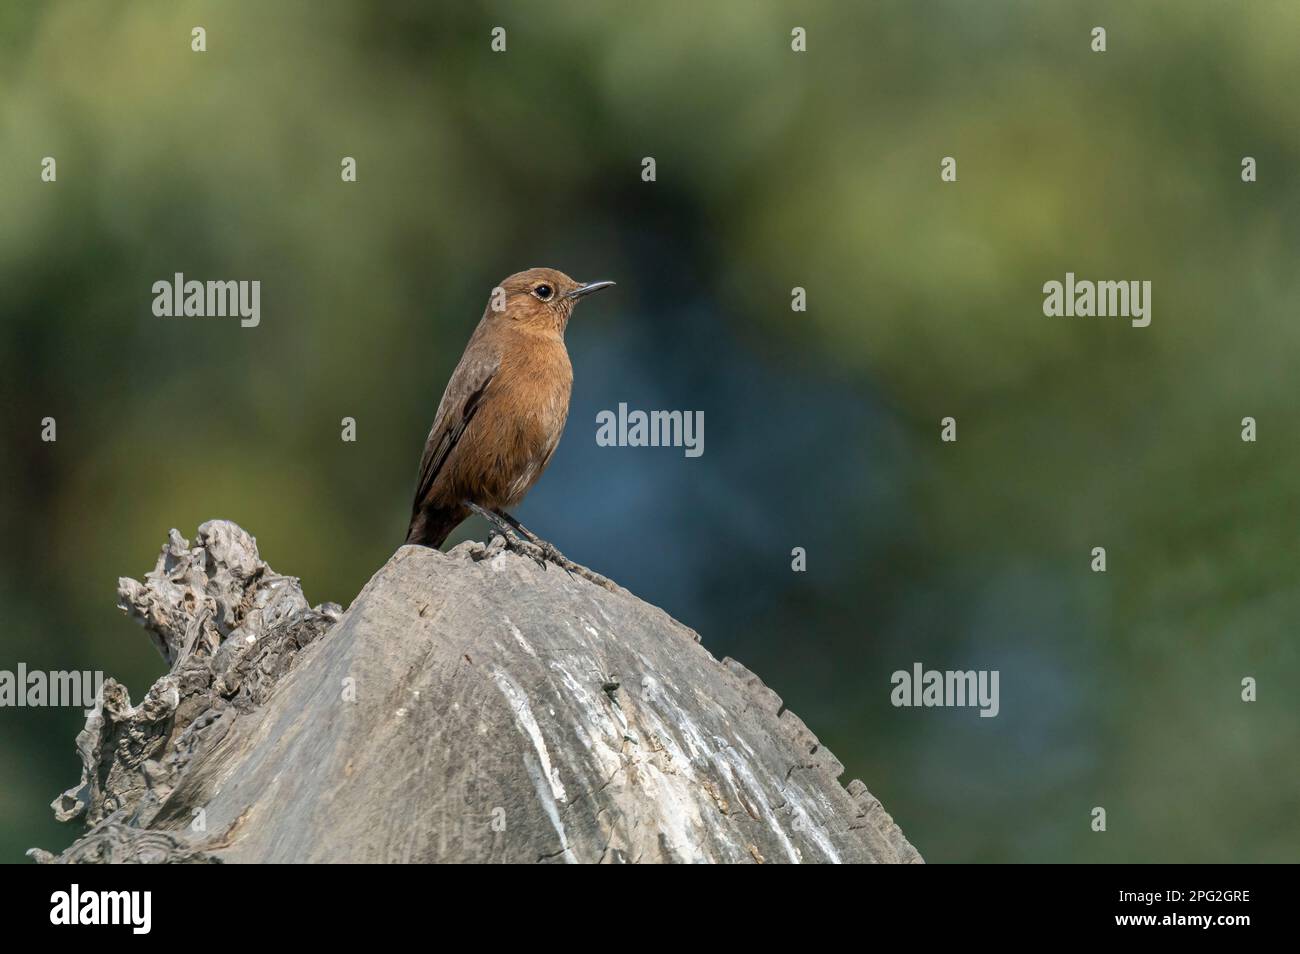 brown rock chat in the blue background , The brown rock chat or Indian chat is a bird species of the family Muscicapidae. It is found mainly in northe Stock Photo